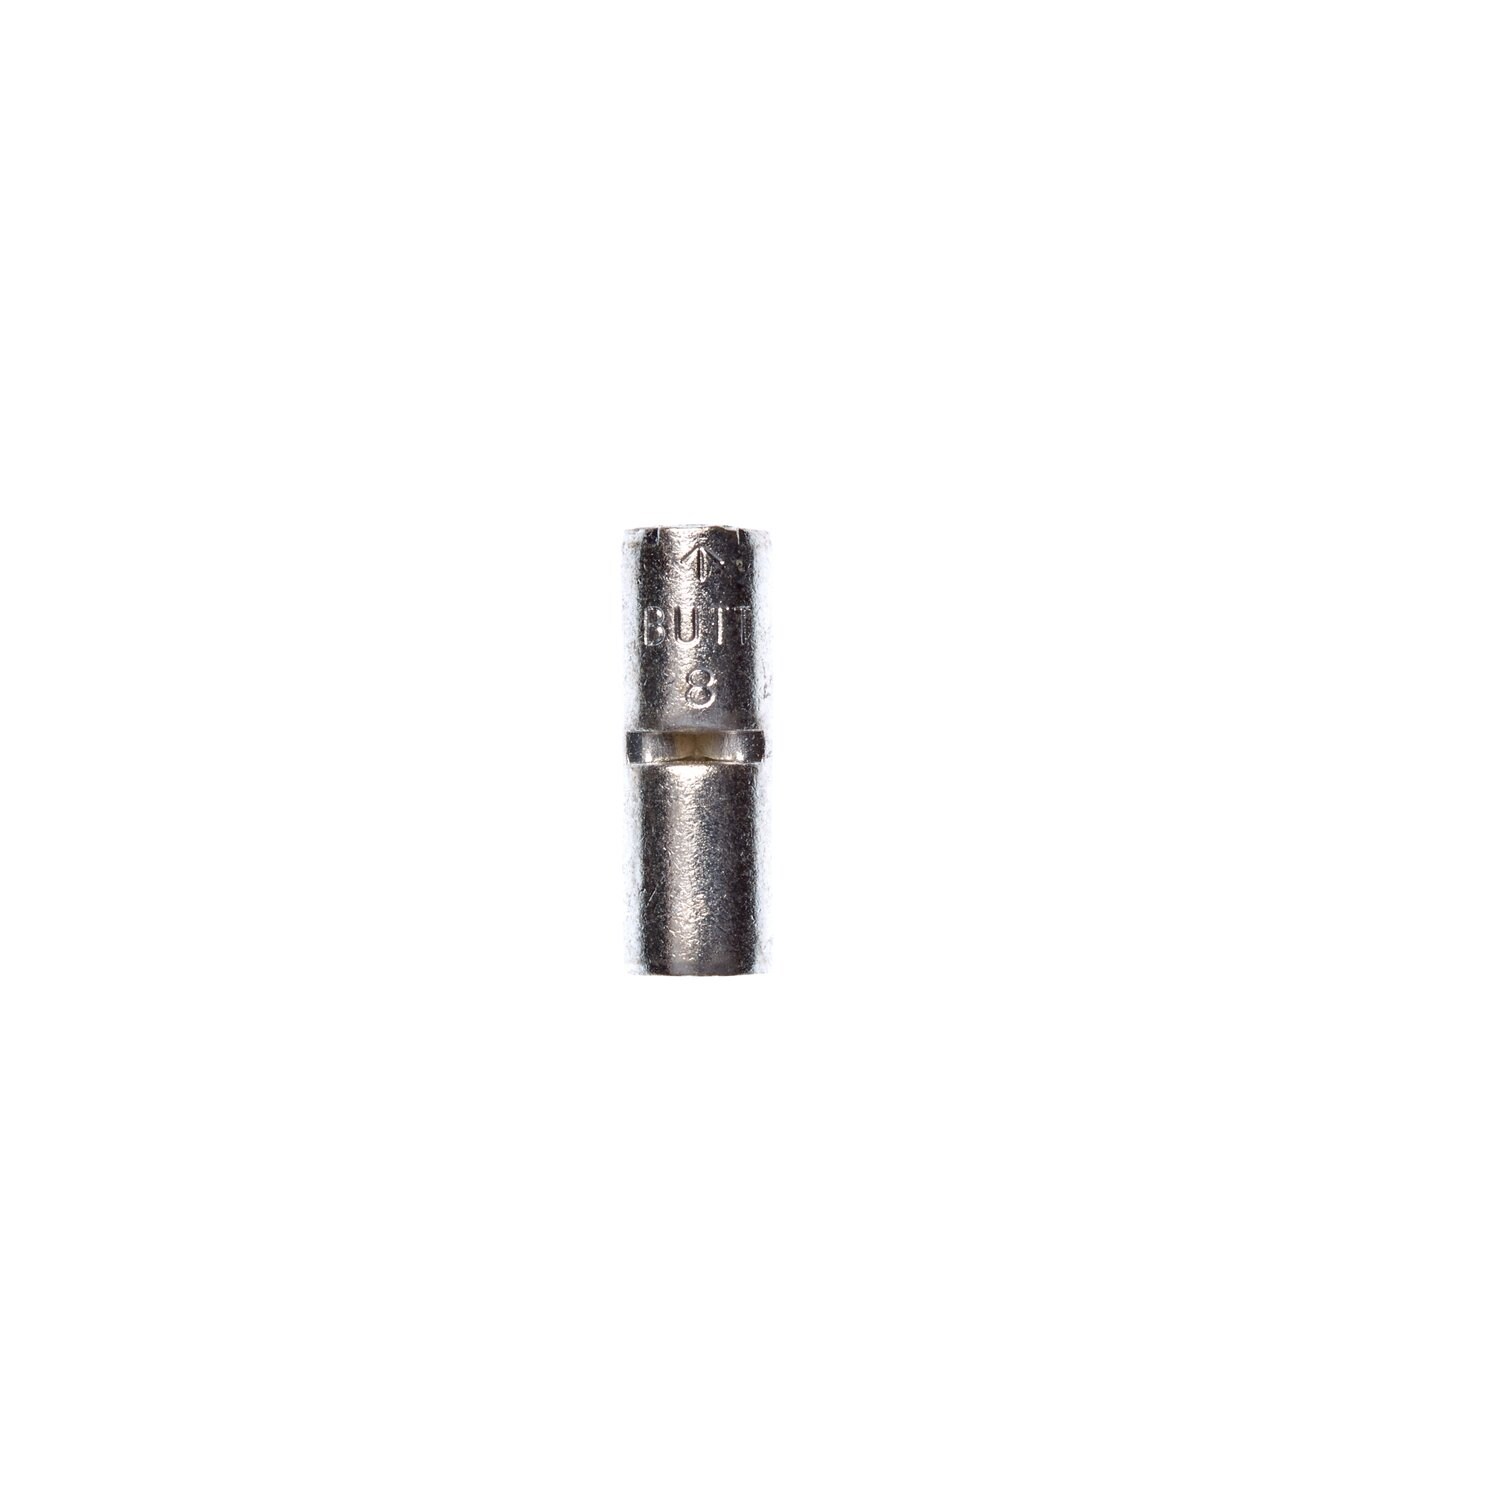 7100027556 - 3M Scotchlok Butt Connector Non-Insulated, 10/bottle, M8BCX, built-in
wire stop for correct positioning, 100/Case